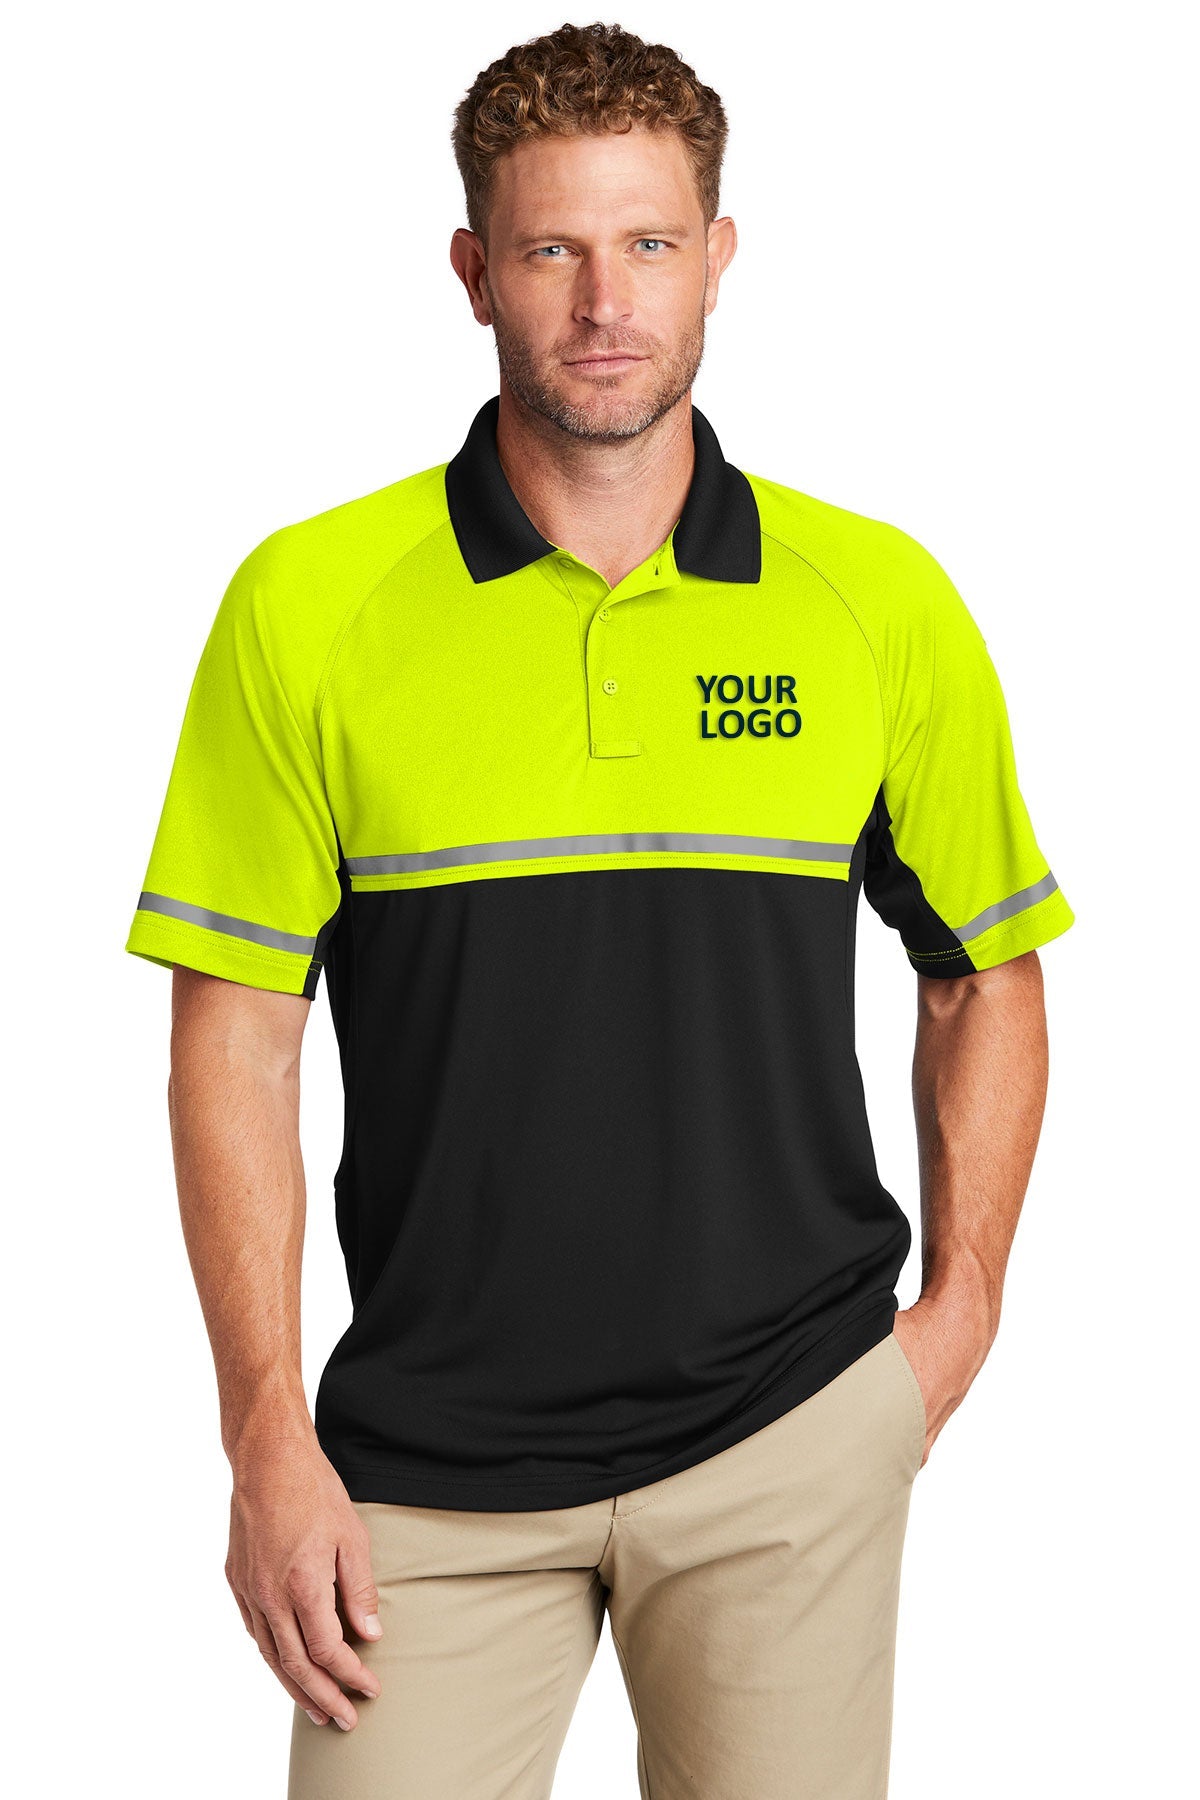 CornerStone Select Lightweight Snag-Proof Enhanced Visibility Polo CS423 Safety Yellow/ Black